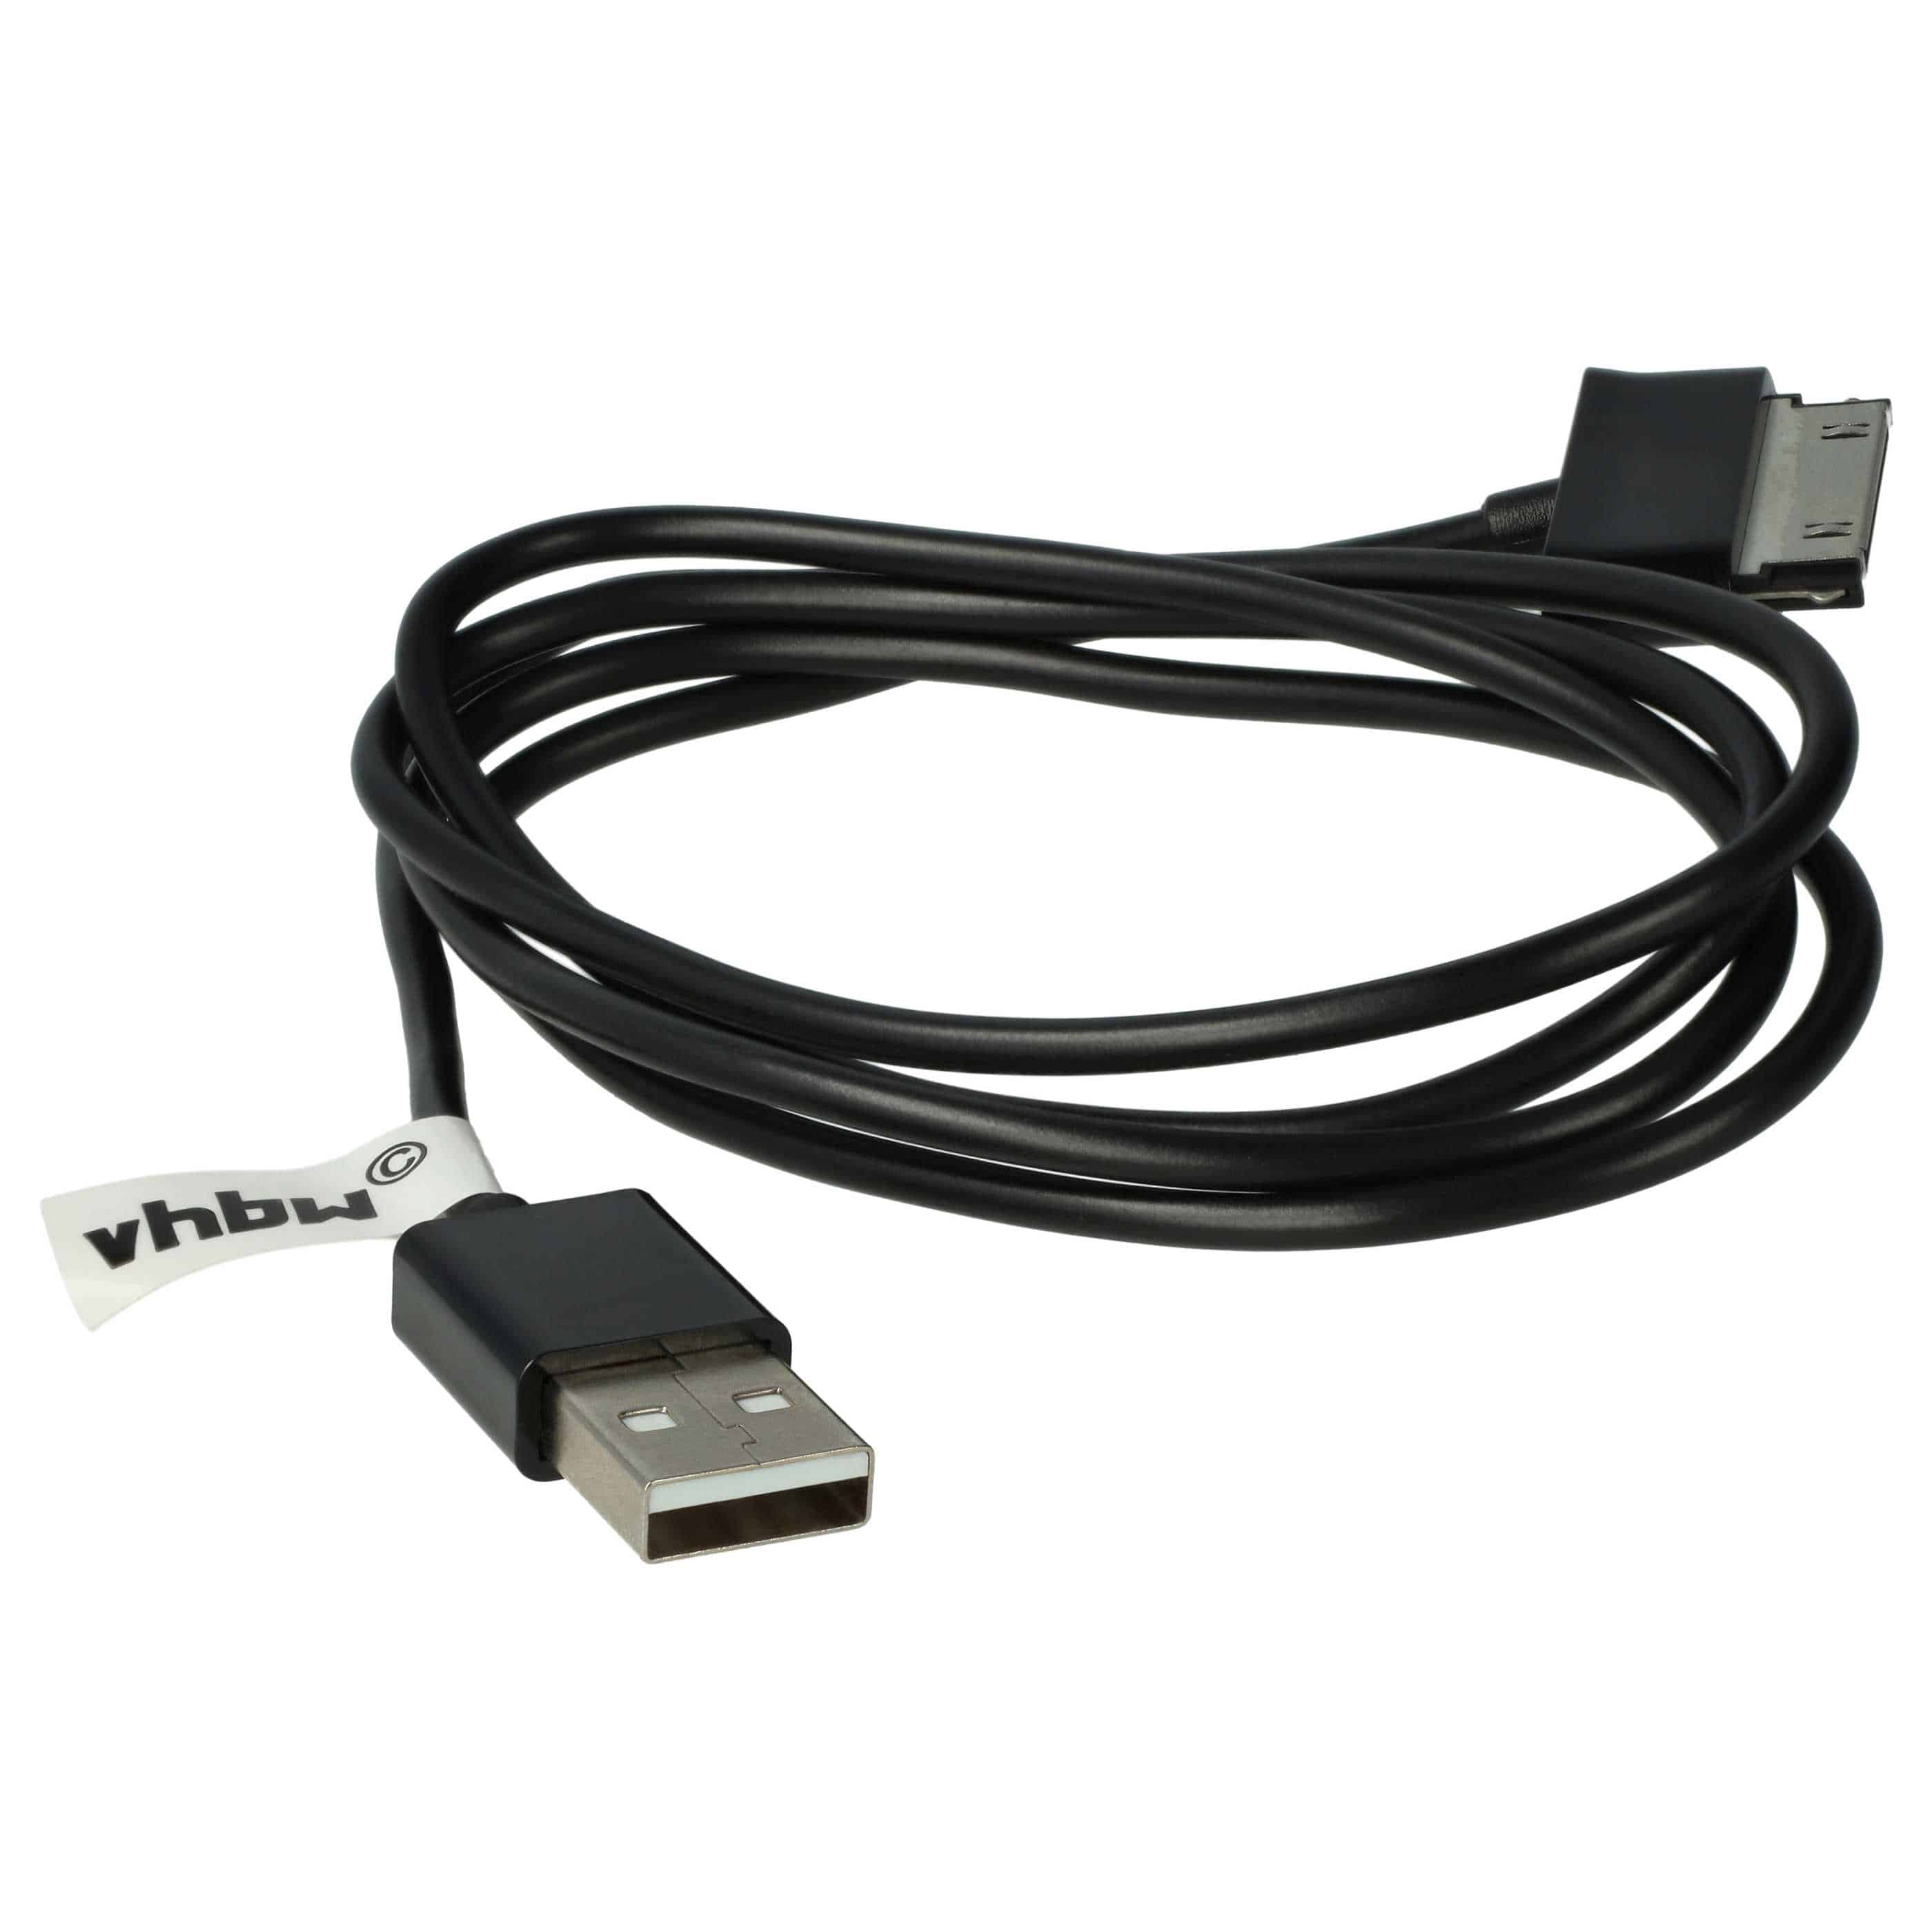 vhbw USB Data Cable Tablet - 2in1 Charging Cable (Standard-USB Type A to Tablet) 120cm Black 